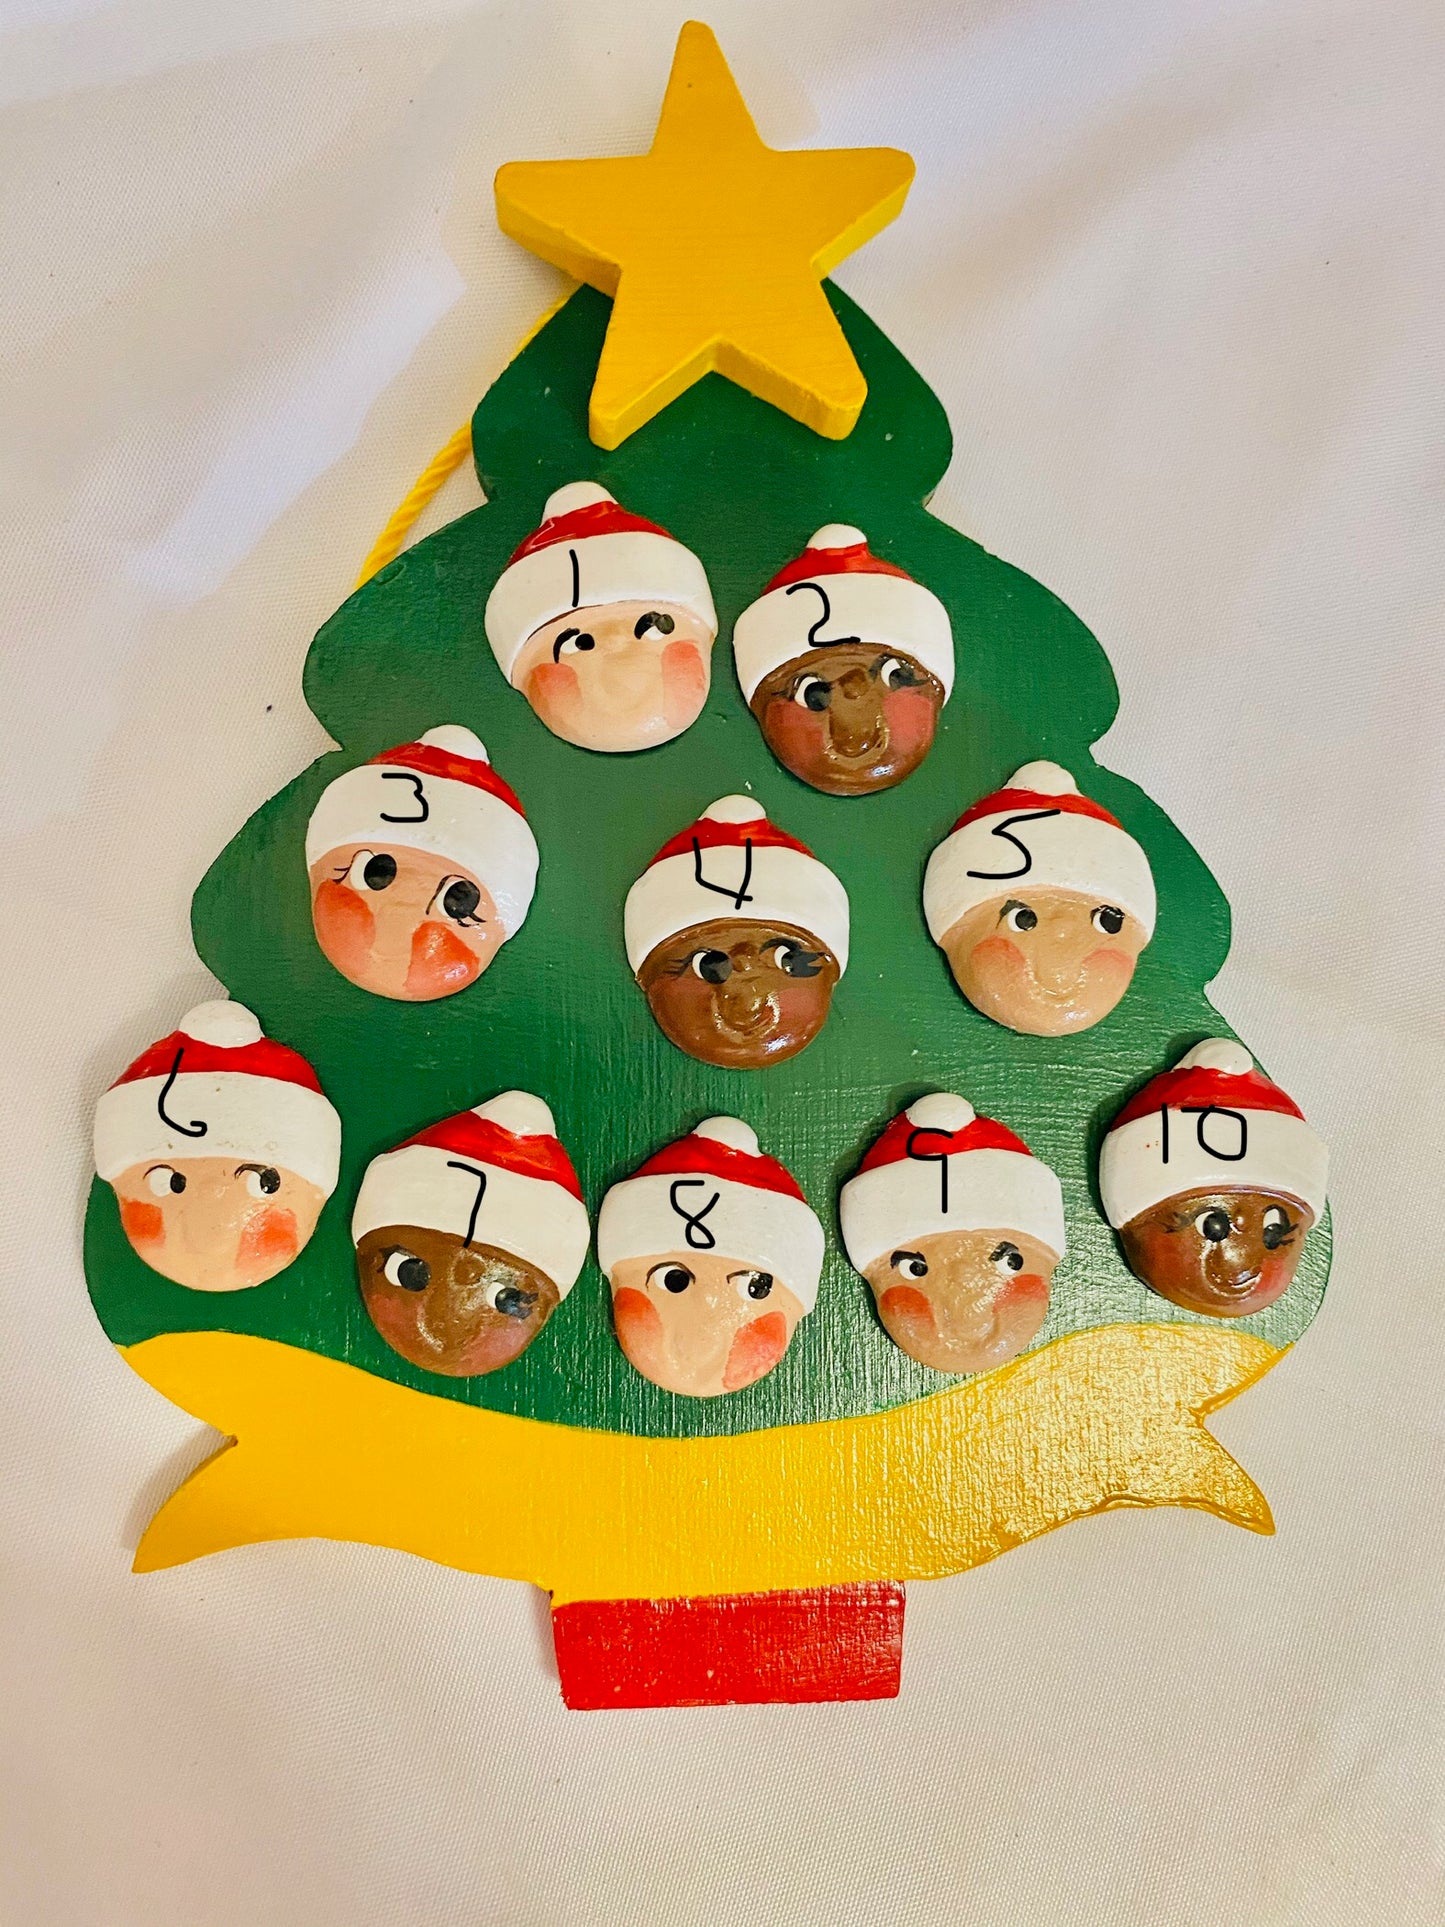 Personalized Ornament 10 Santa Faces on a Christmas Tree  6" x 4.5"